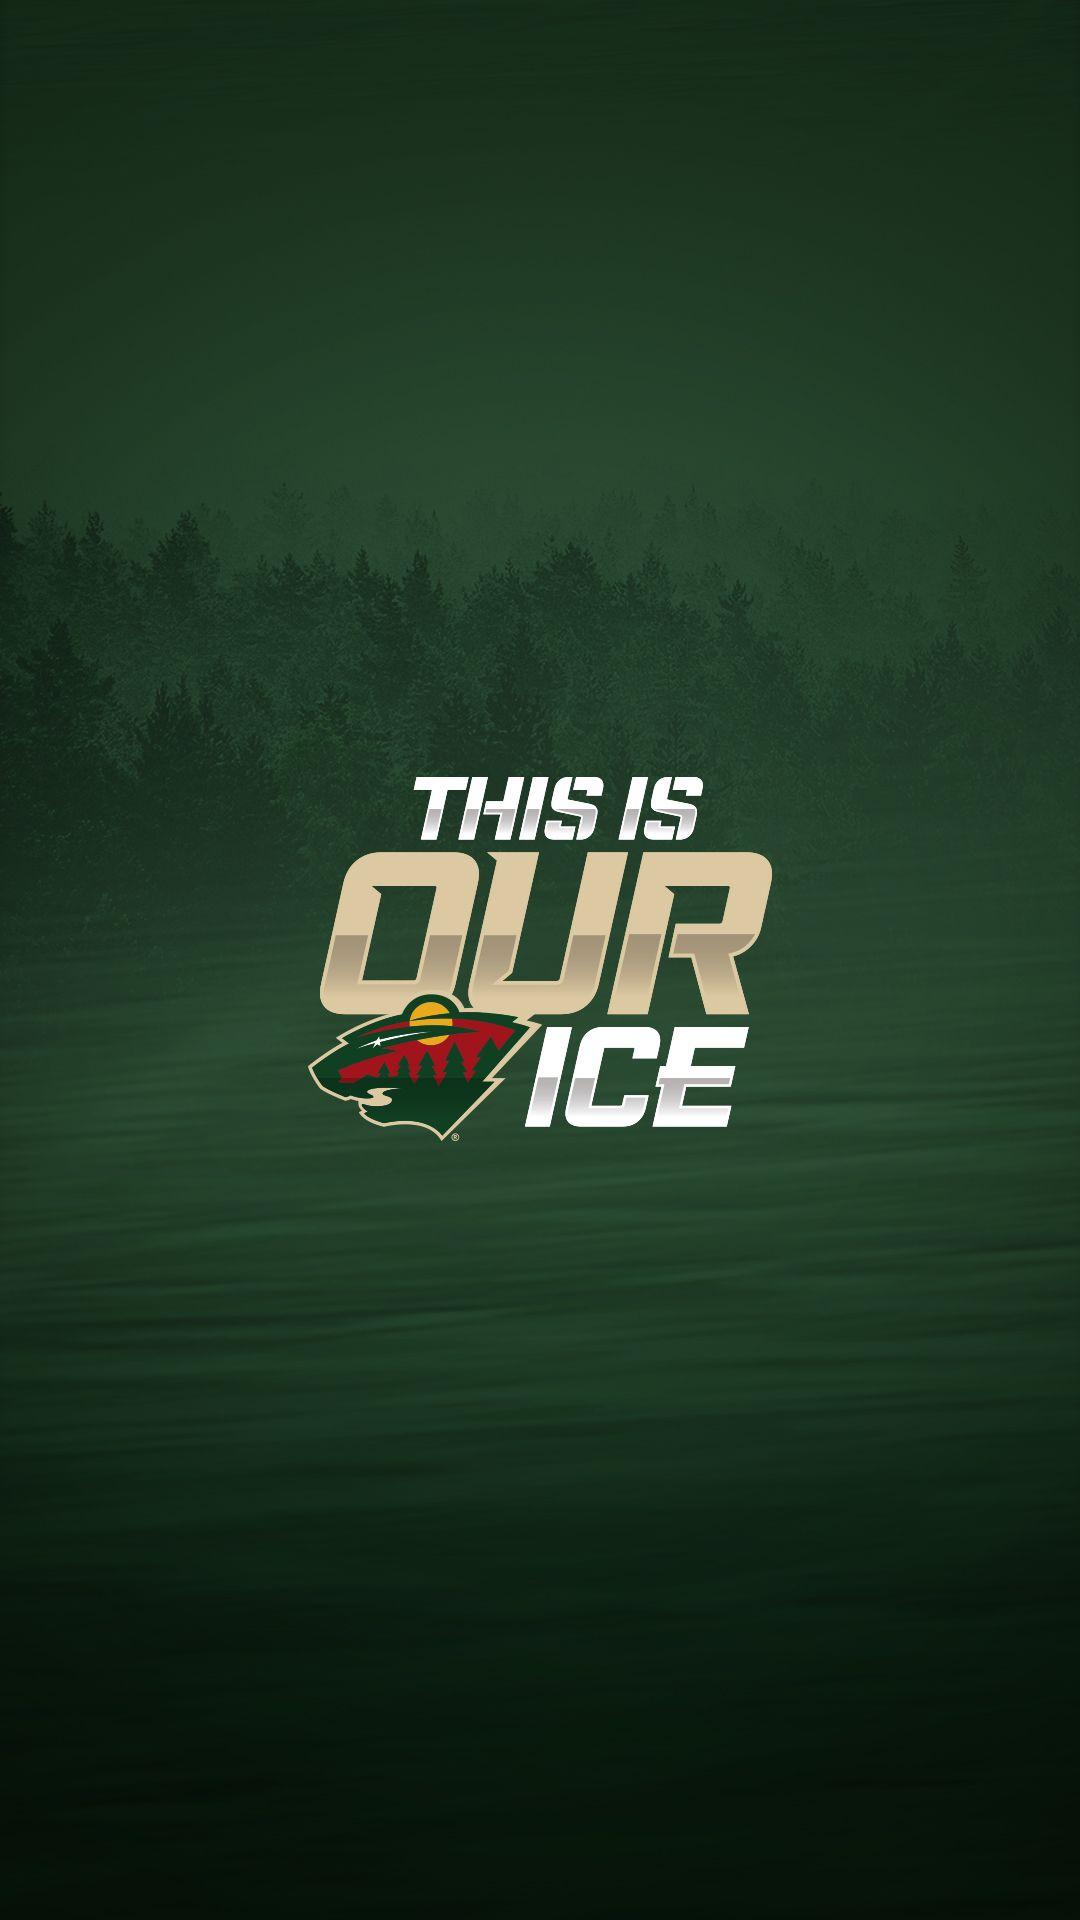 Minnesota Wild on X: It's #WallpaperWednesday time! Looking for more  wallpapers? ⇢  #mnwild  / X